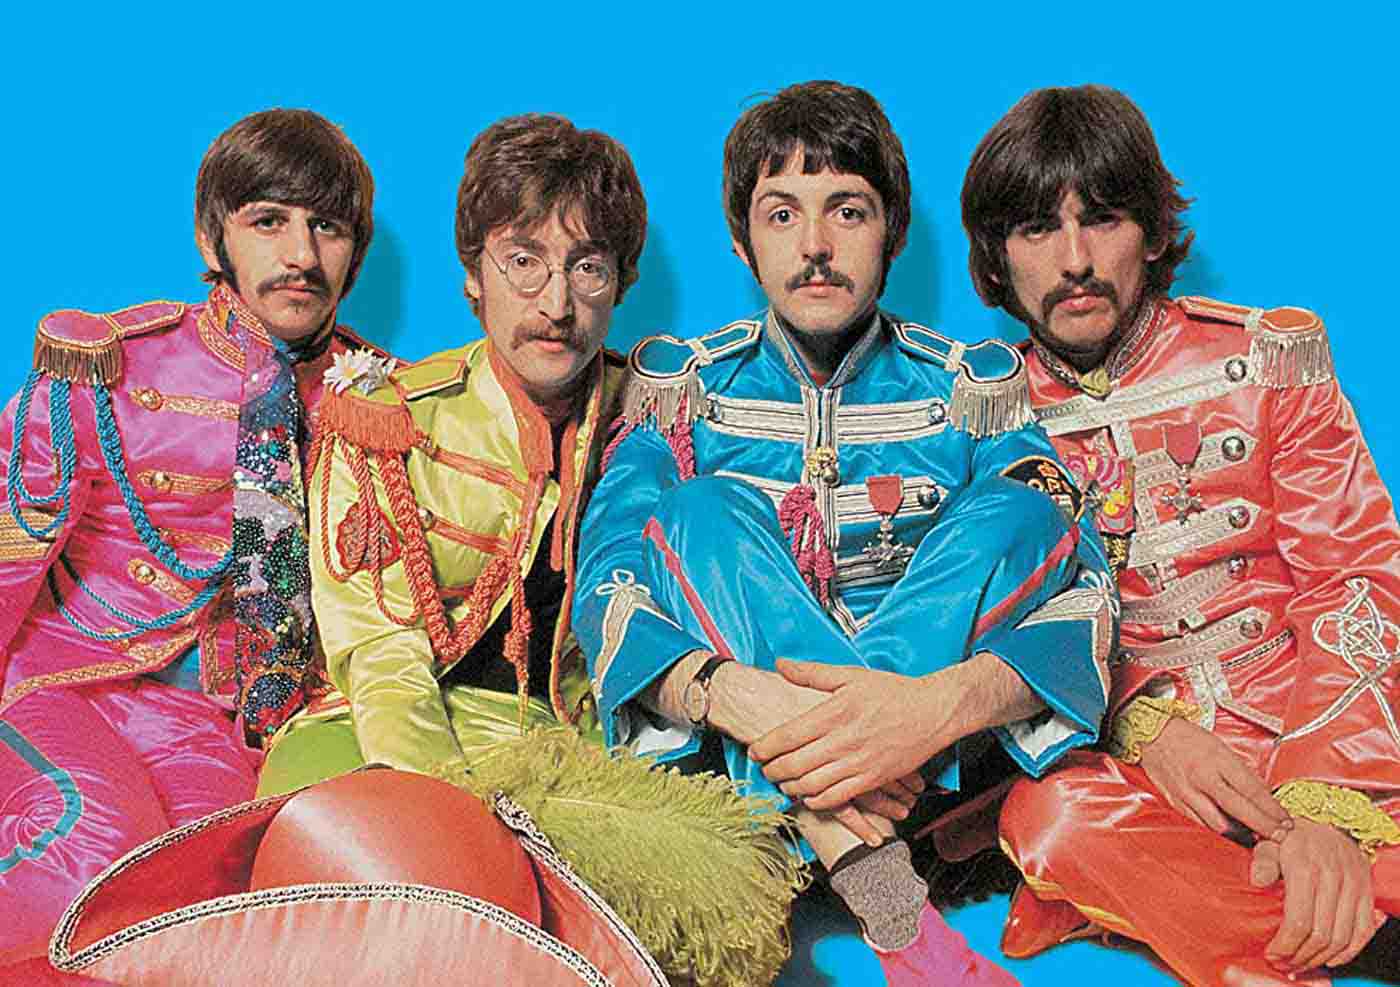 Image of the Beatles